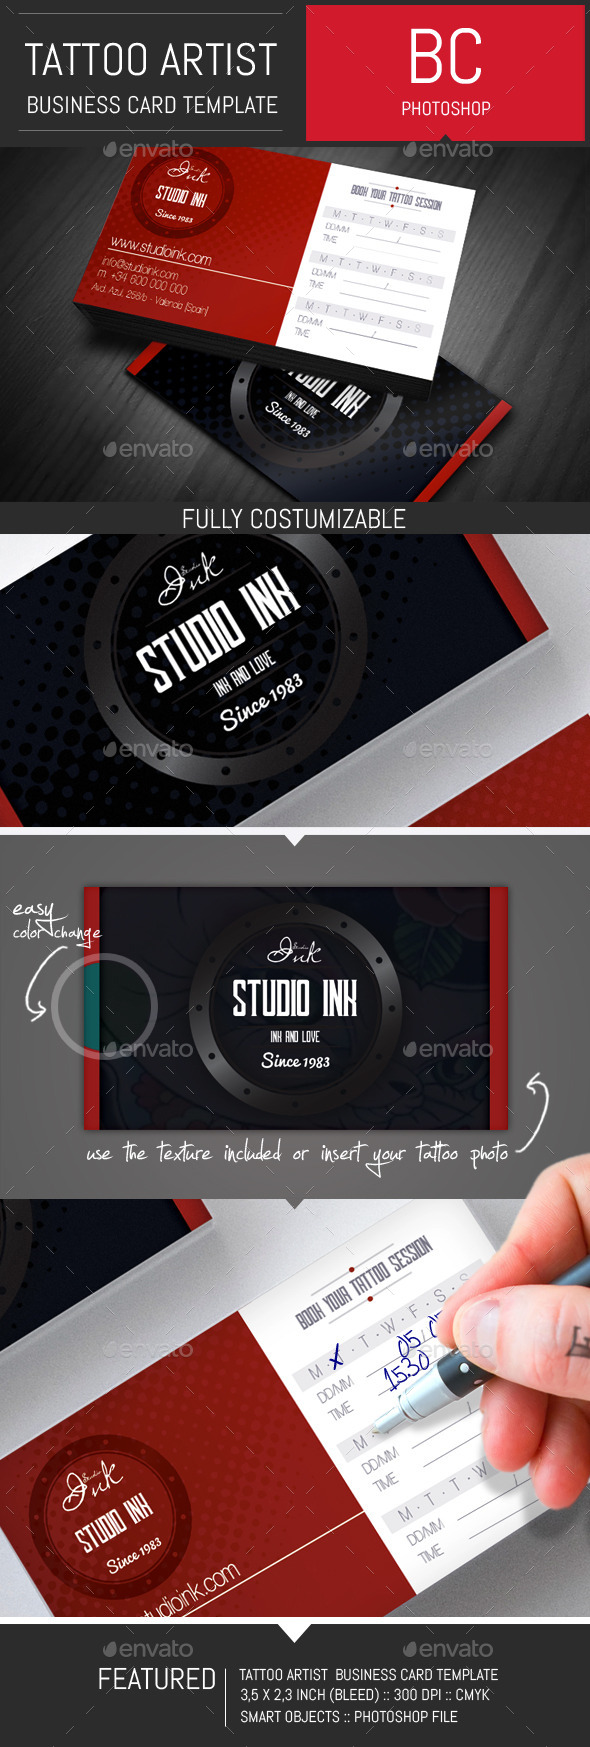 Tattoo Artist Business Card Template by DogmaDesign GraphicRiver